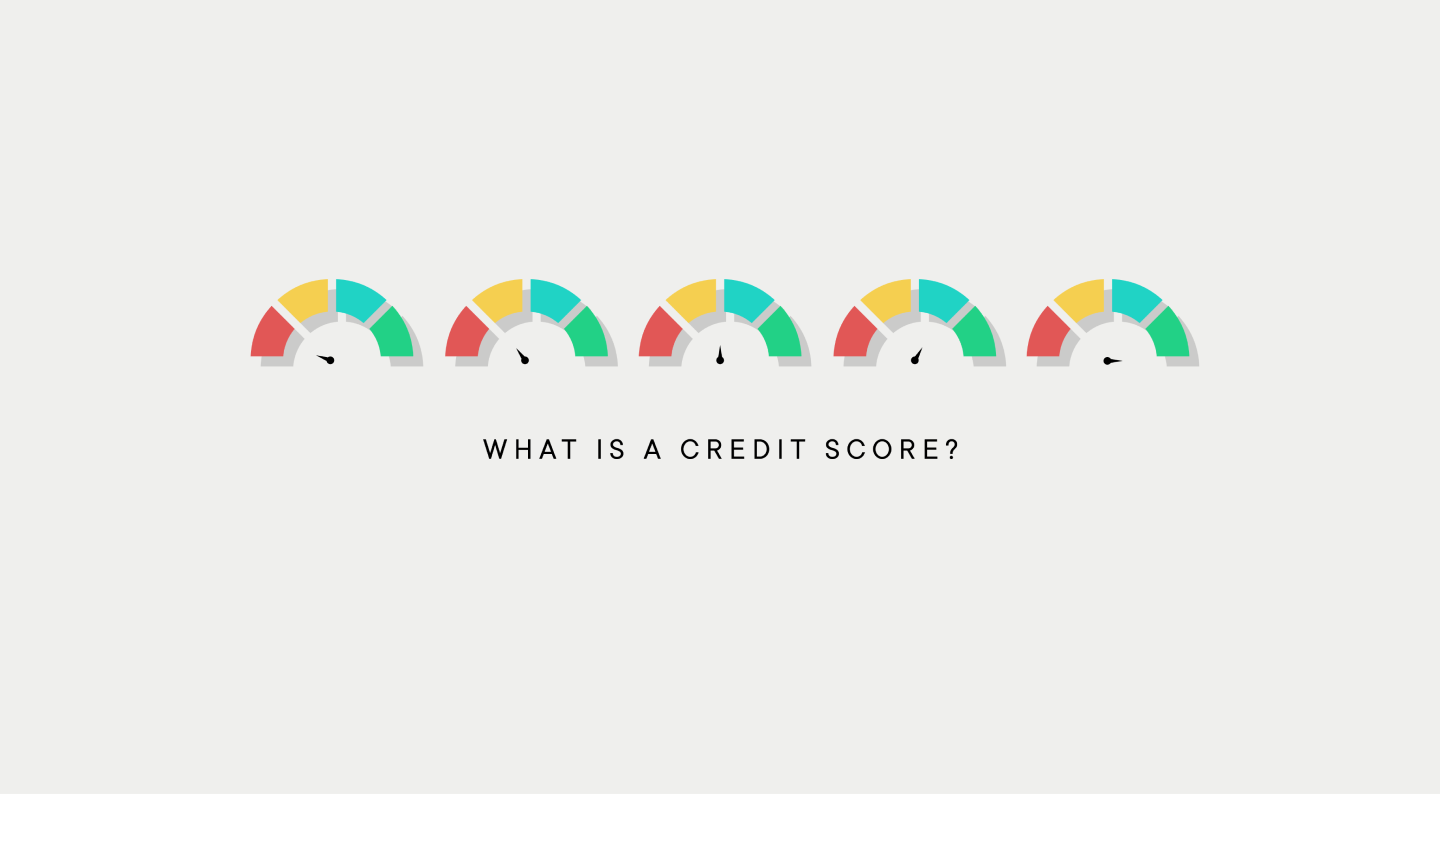 Do you want to learn about credit scores? We’ll teach you everything you need to know and get you on the road to being a credit score expert in no time.